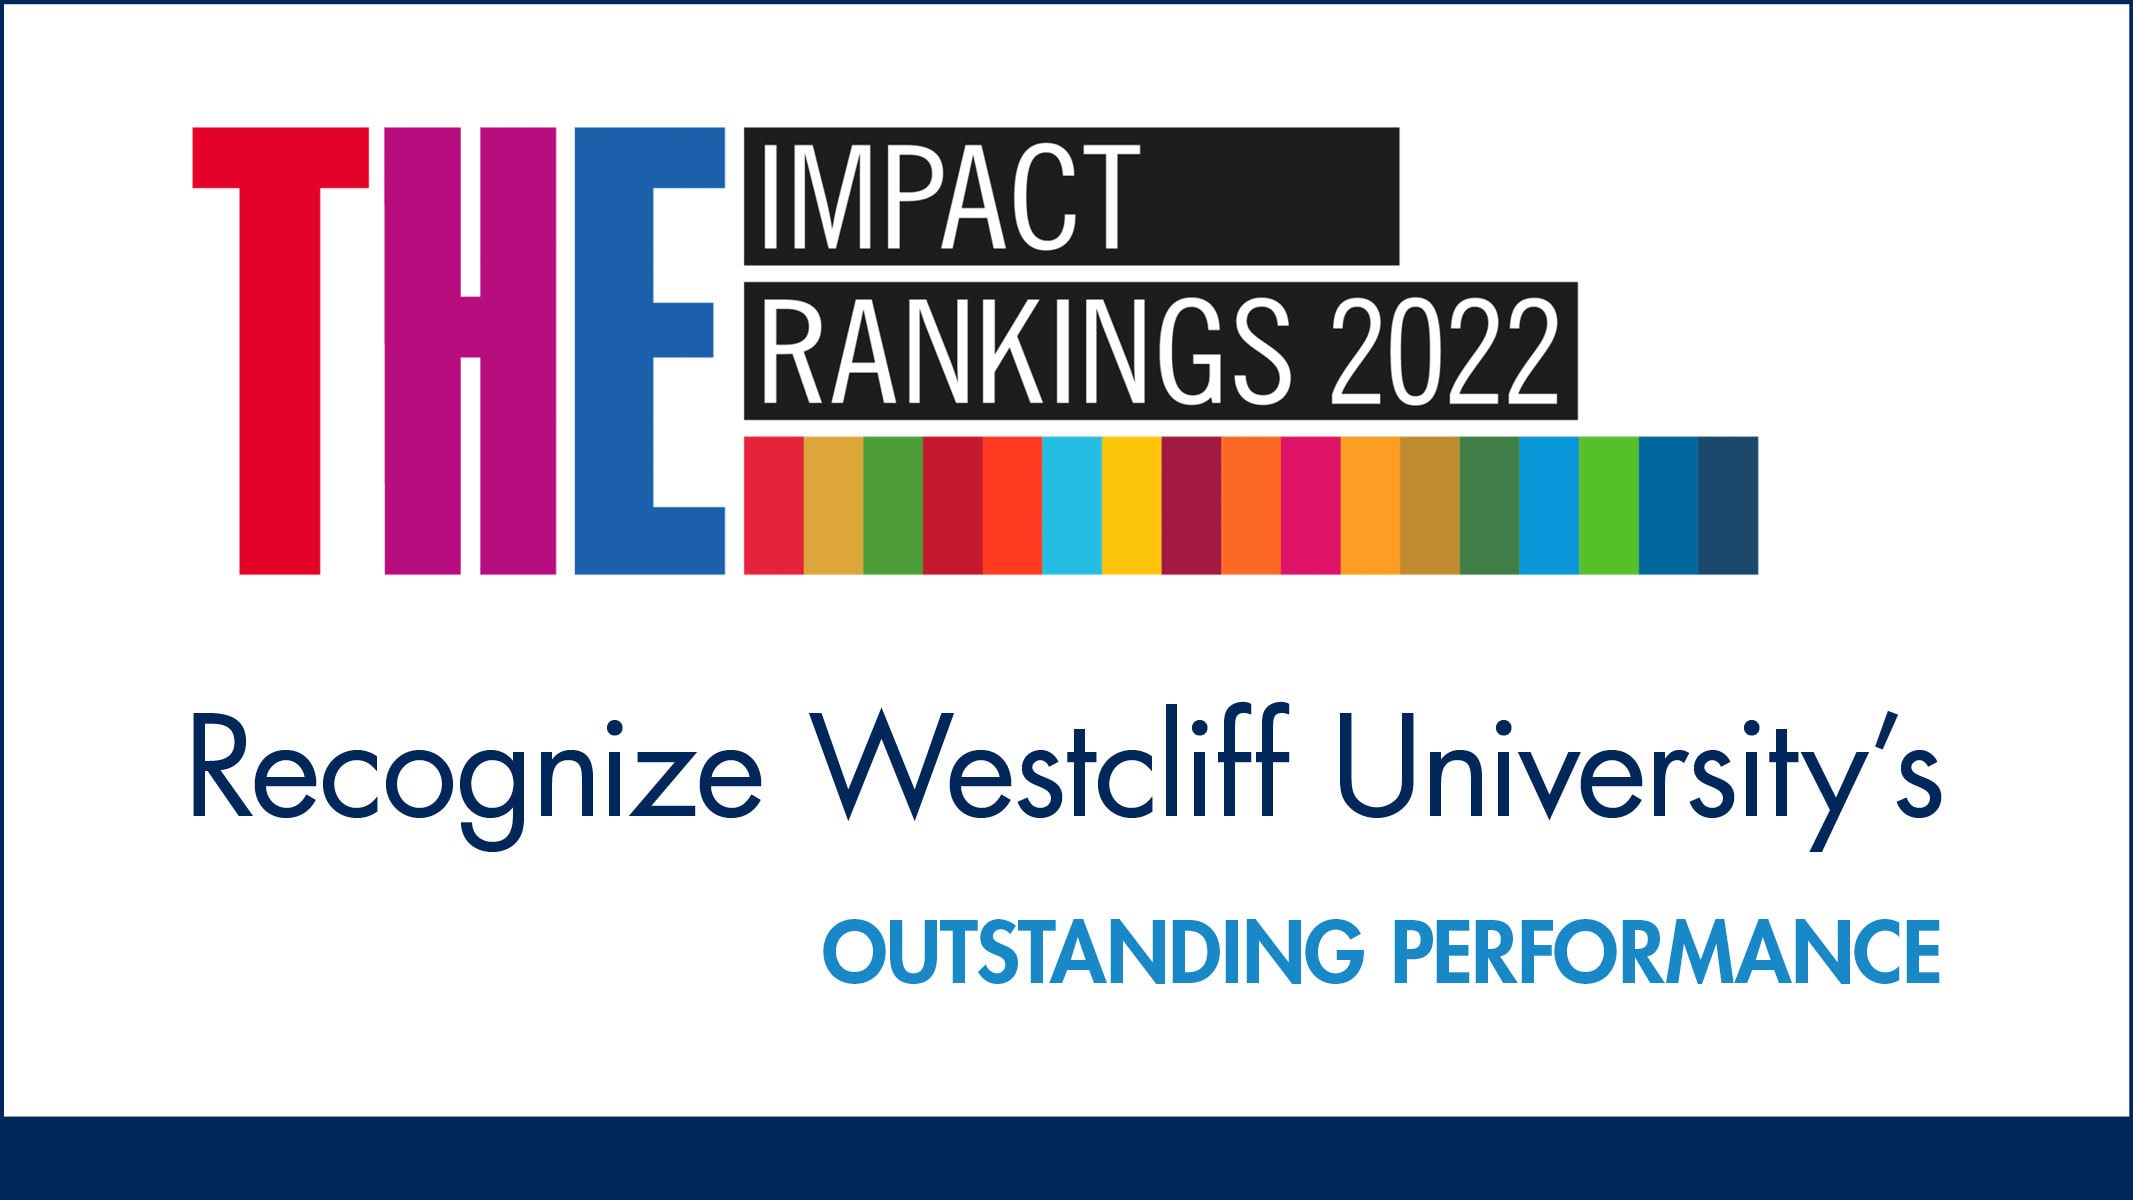 WESTCLIFF UNIVERSITY 2022 IMPACT RANKINGS OUTPERFORM PREVIOUS  YEAR’S RESULTS